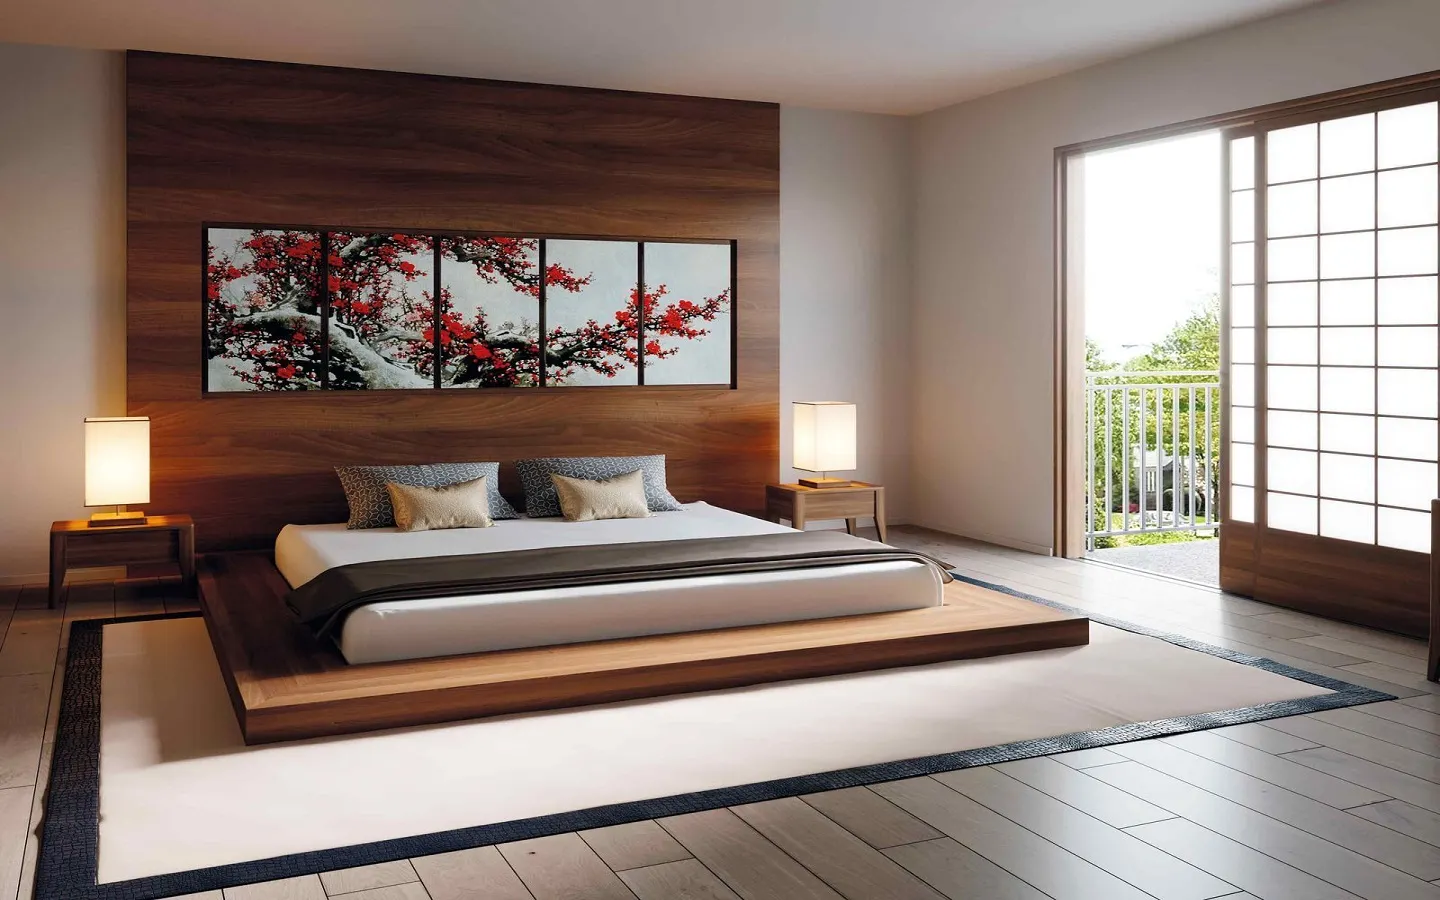 Japandi Bedroom: The Fusion of Serenity and Elegance